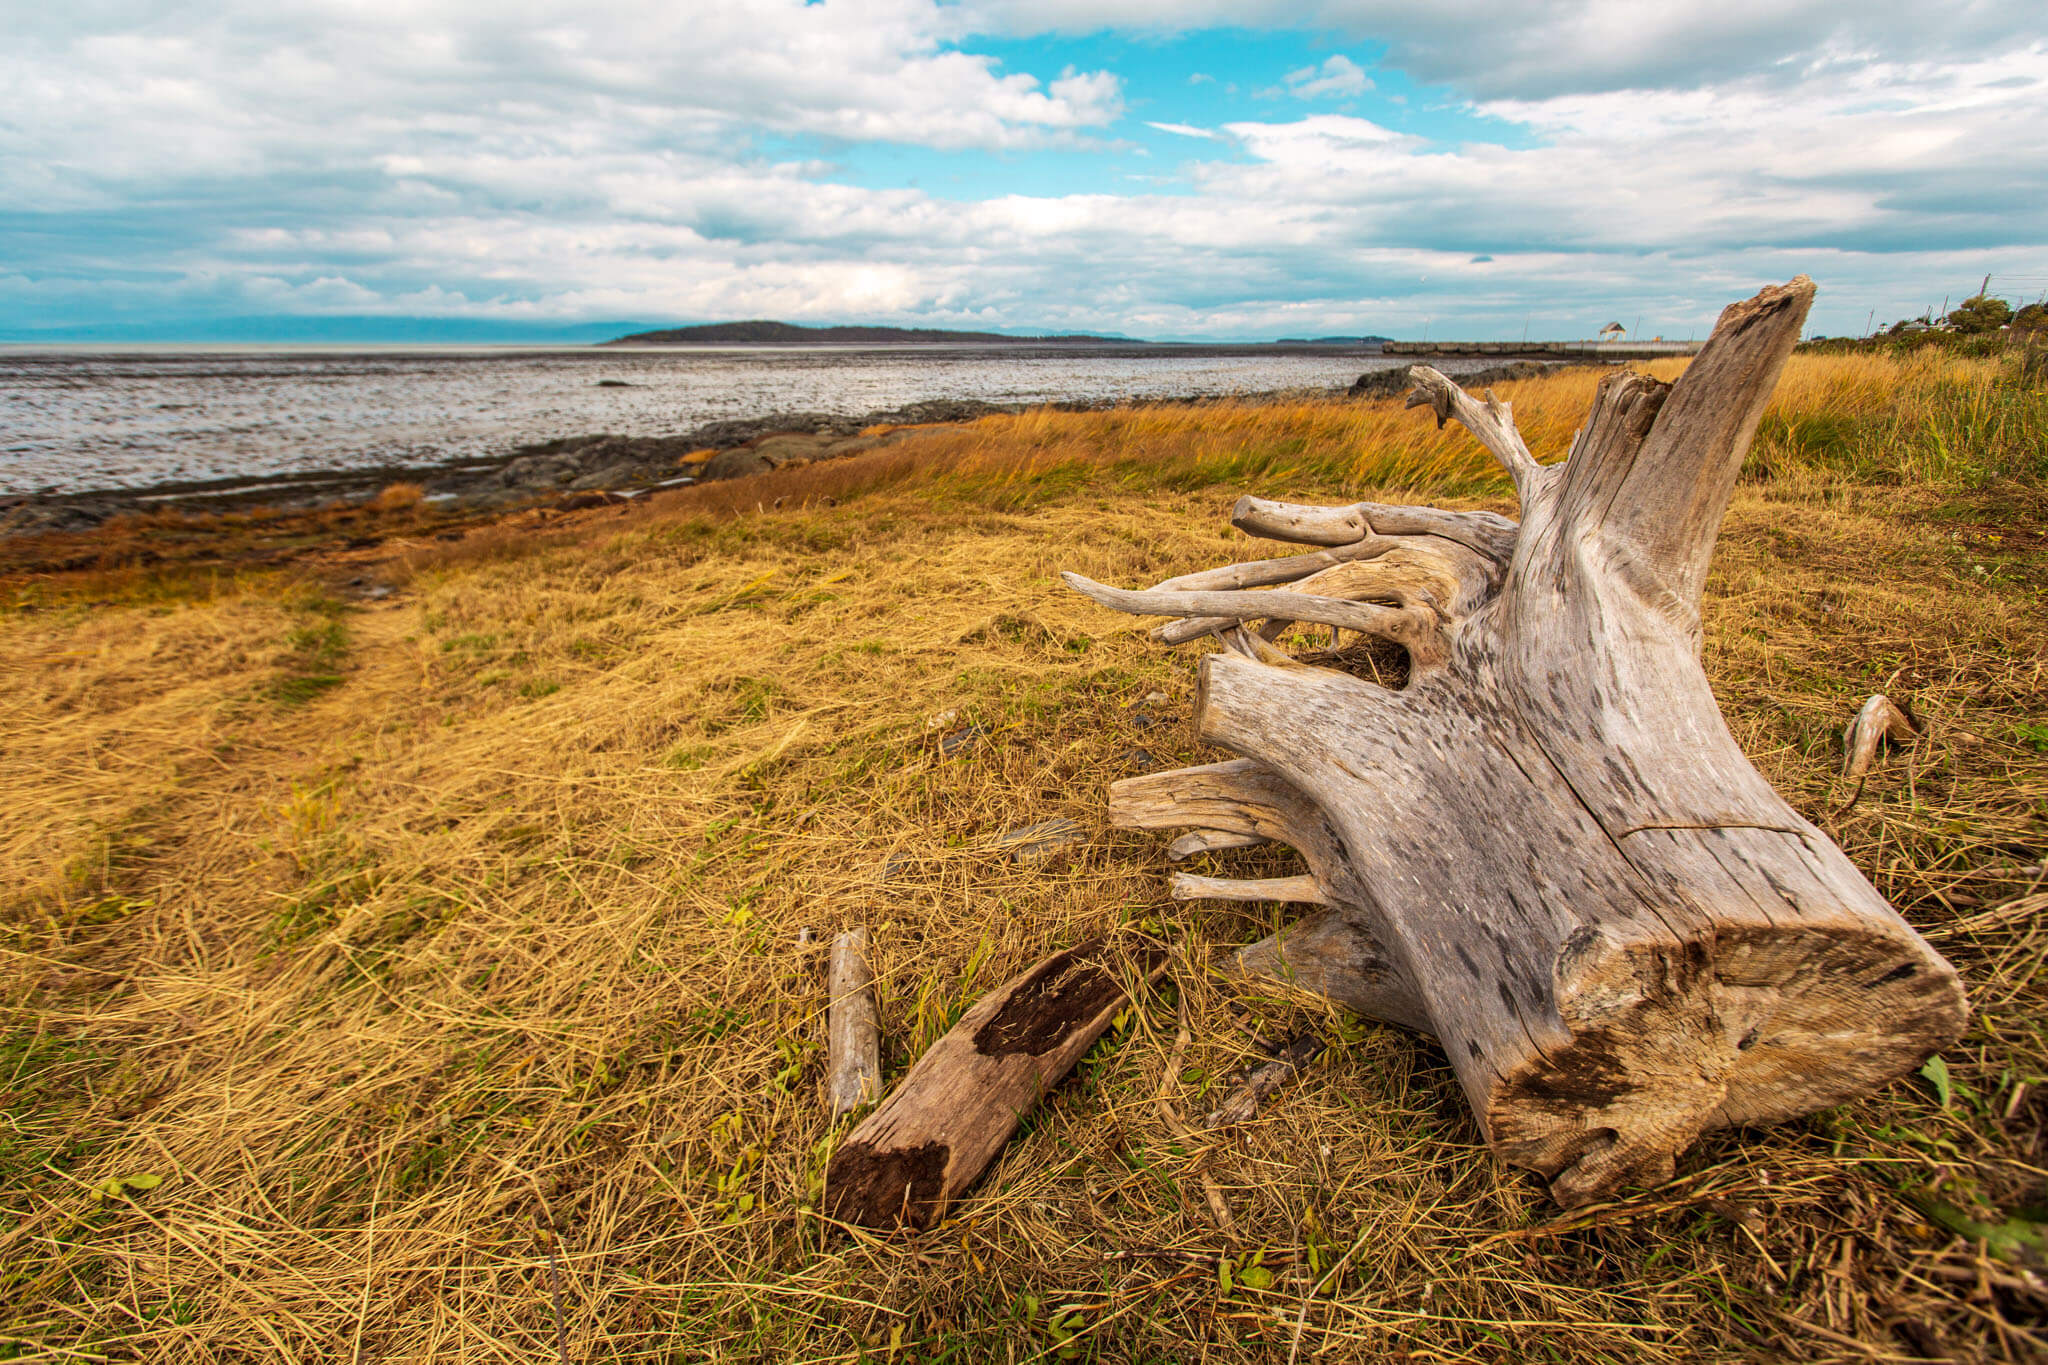 A driftwood tree stump along the shore of the St. Lawrence river in Kamouraska, Quebec